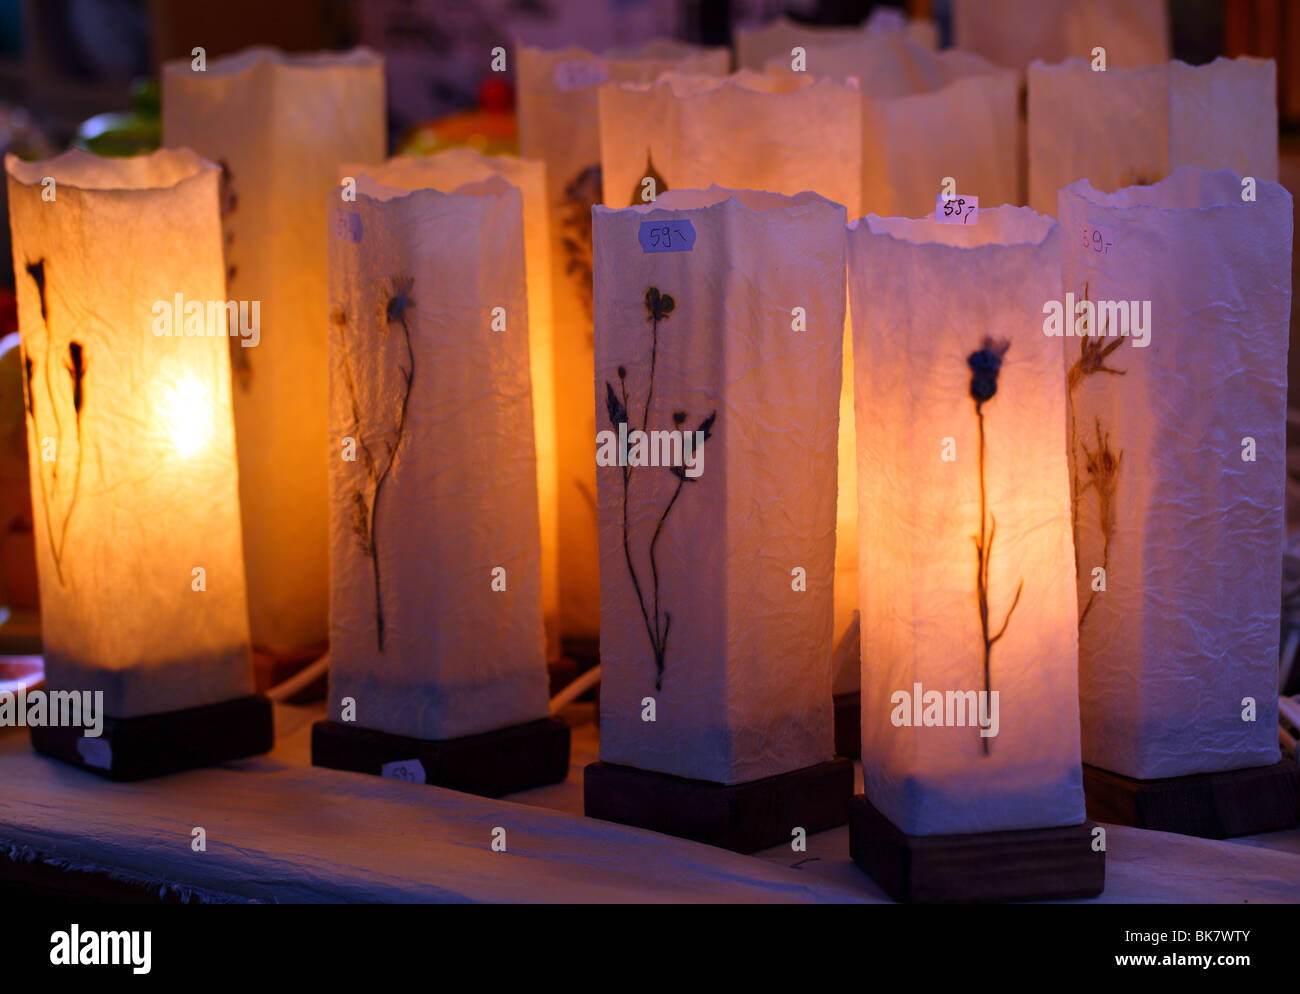 Candle lamps made of paper Stock Photo